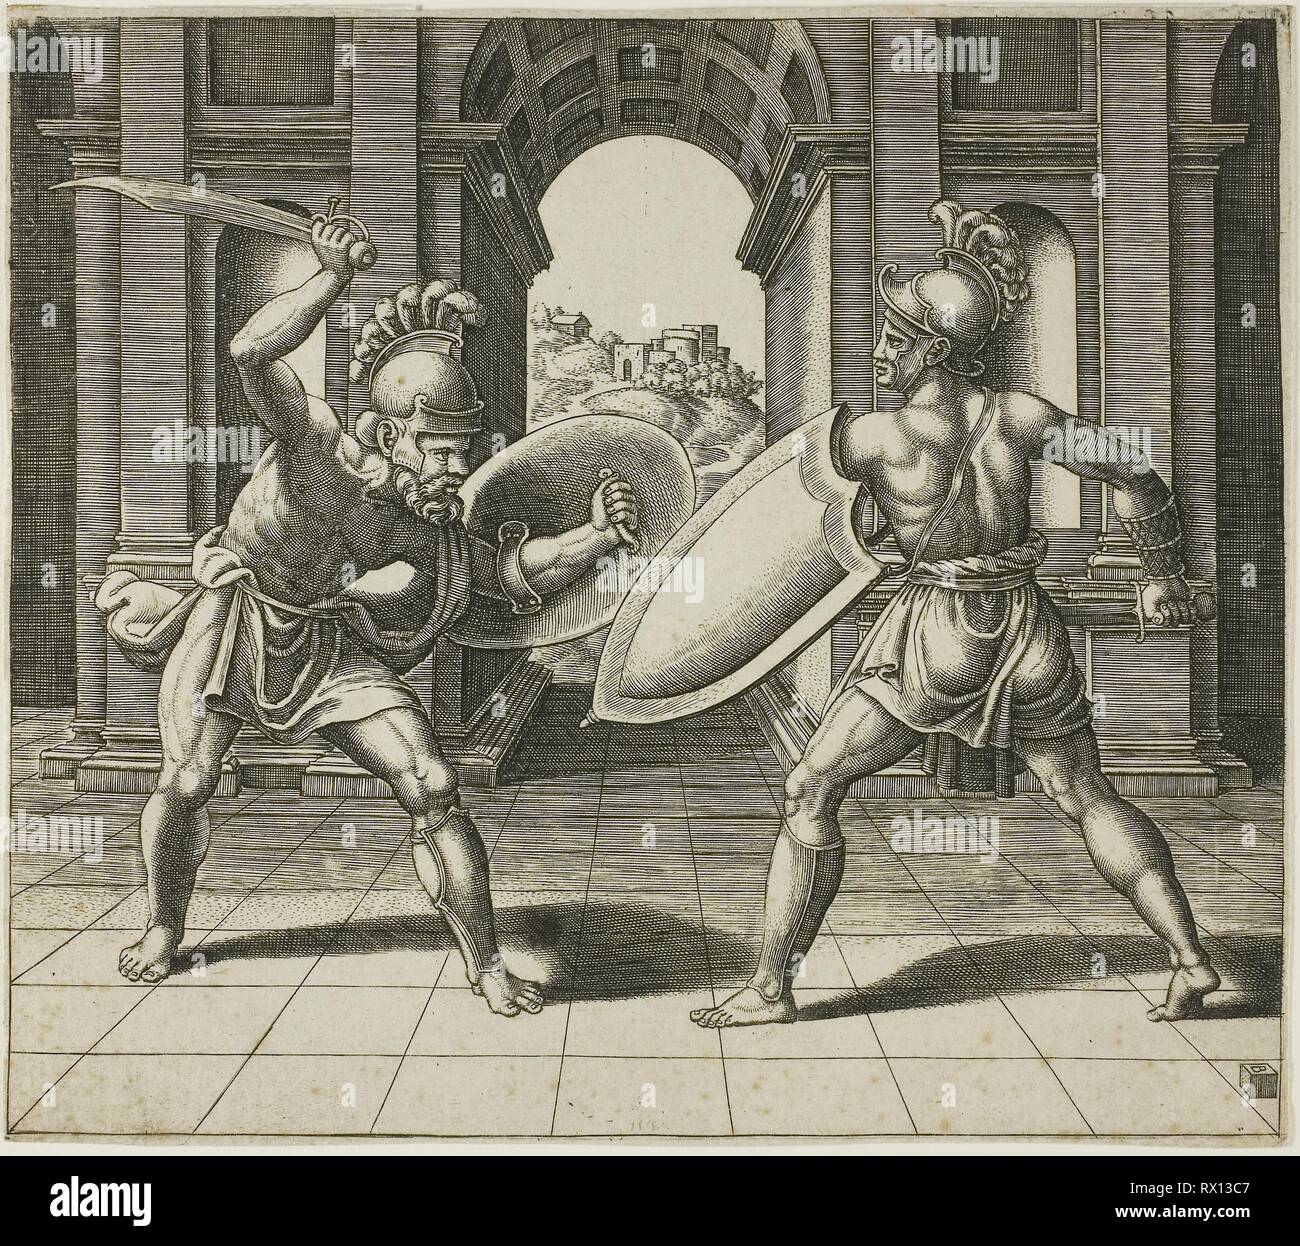 The Two Gladiators. Master of the Die (Italian, active c. 1530-1560); after Giulio Romano (Italian, c. 1499-1546). Date: 1530-1540. Dimensions: 207 x 232 mm. Engraving in black on cream laid paper. Origin: Italy. Museum: The Chicago Art Institute. Stock Photo